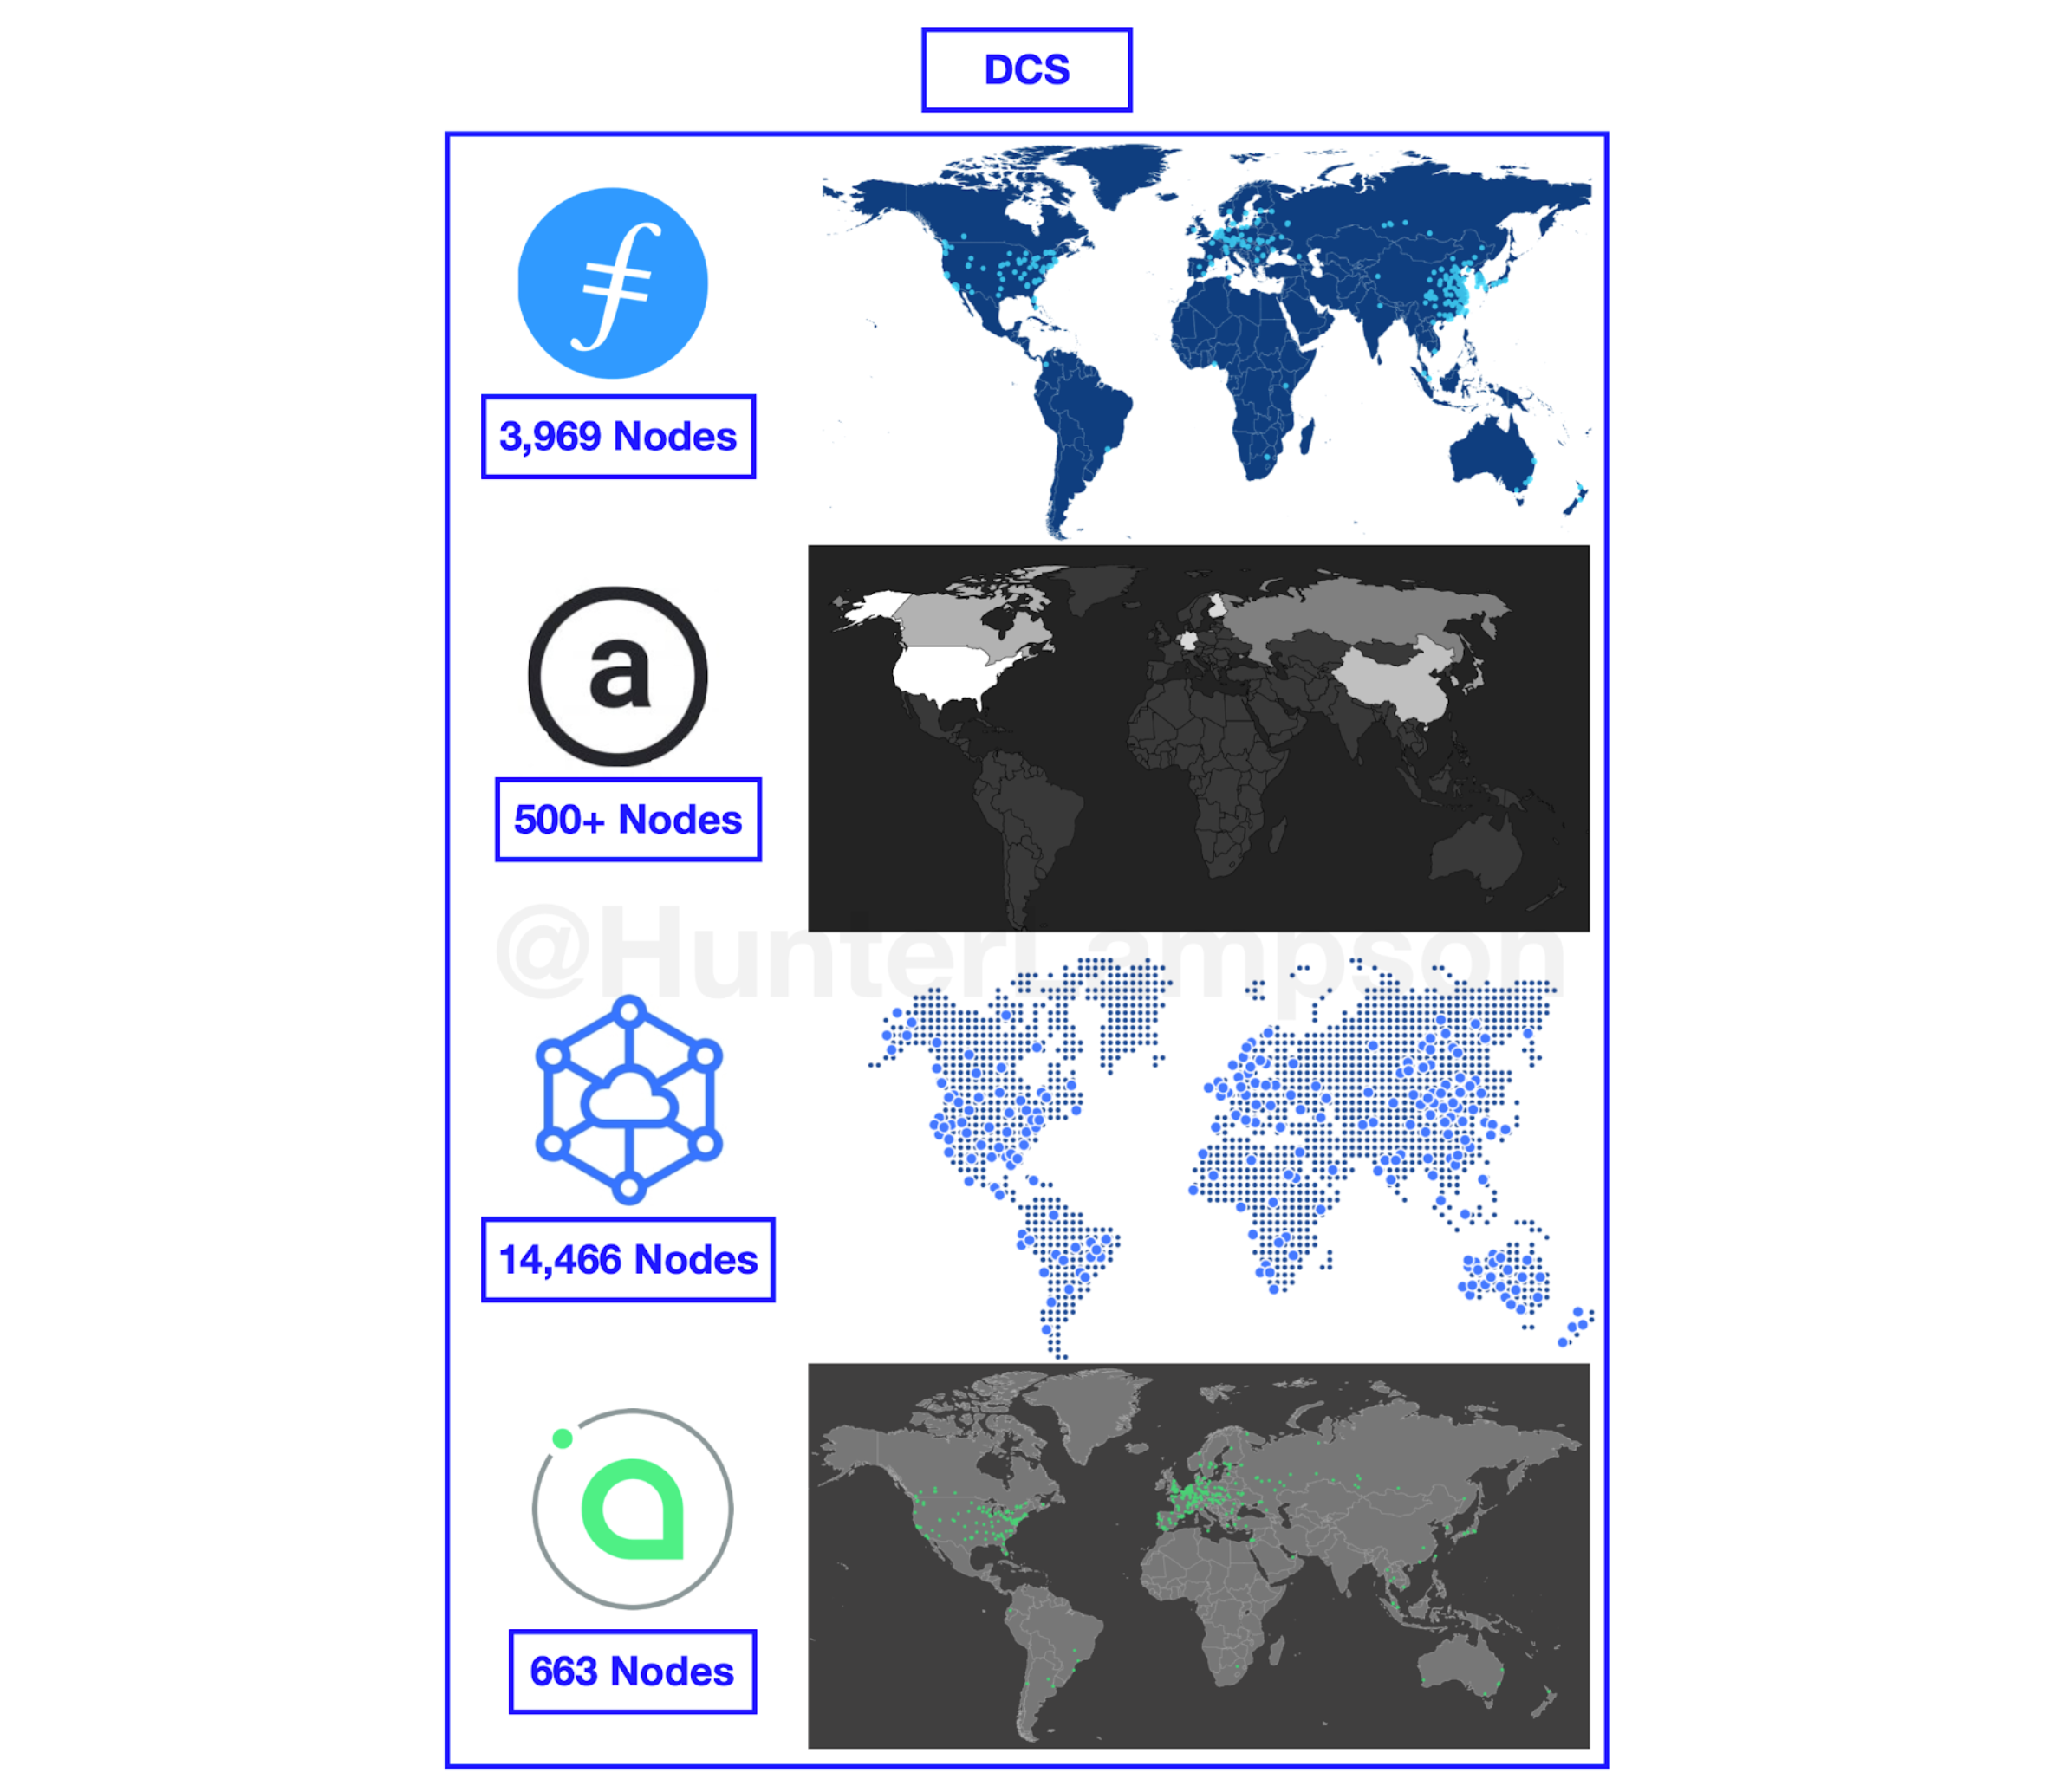 Figure 11. Geographical distribution of DCS nodes. Sources: Filscan, Viewblock, Storj, SiaStats, Sam Williams.